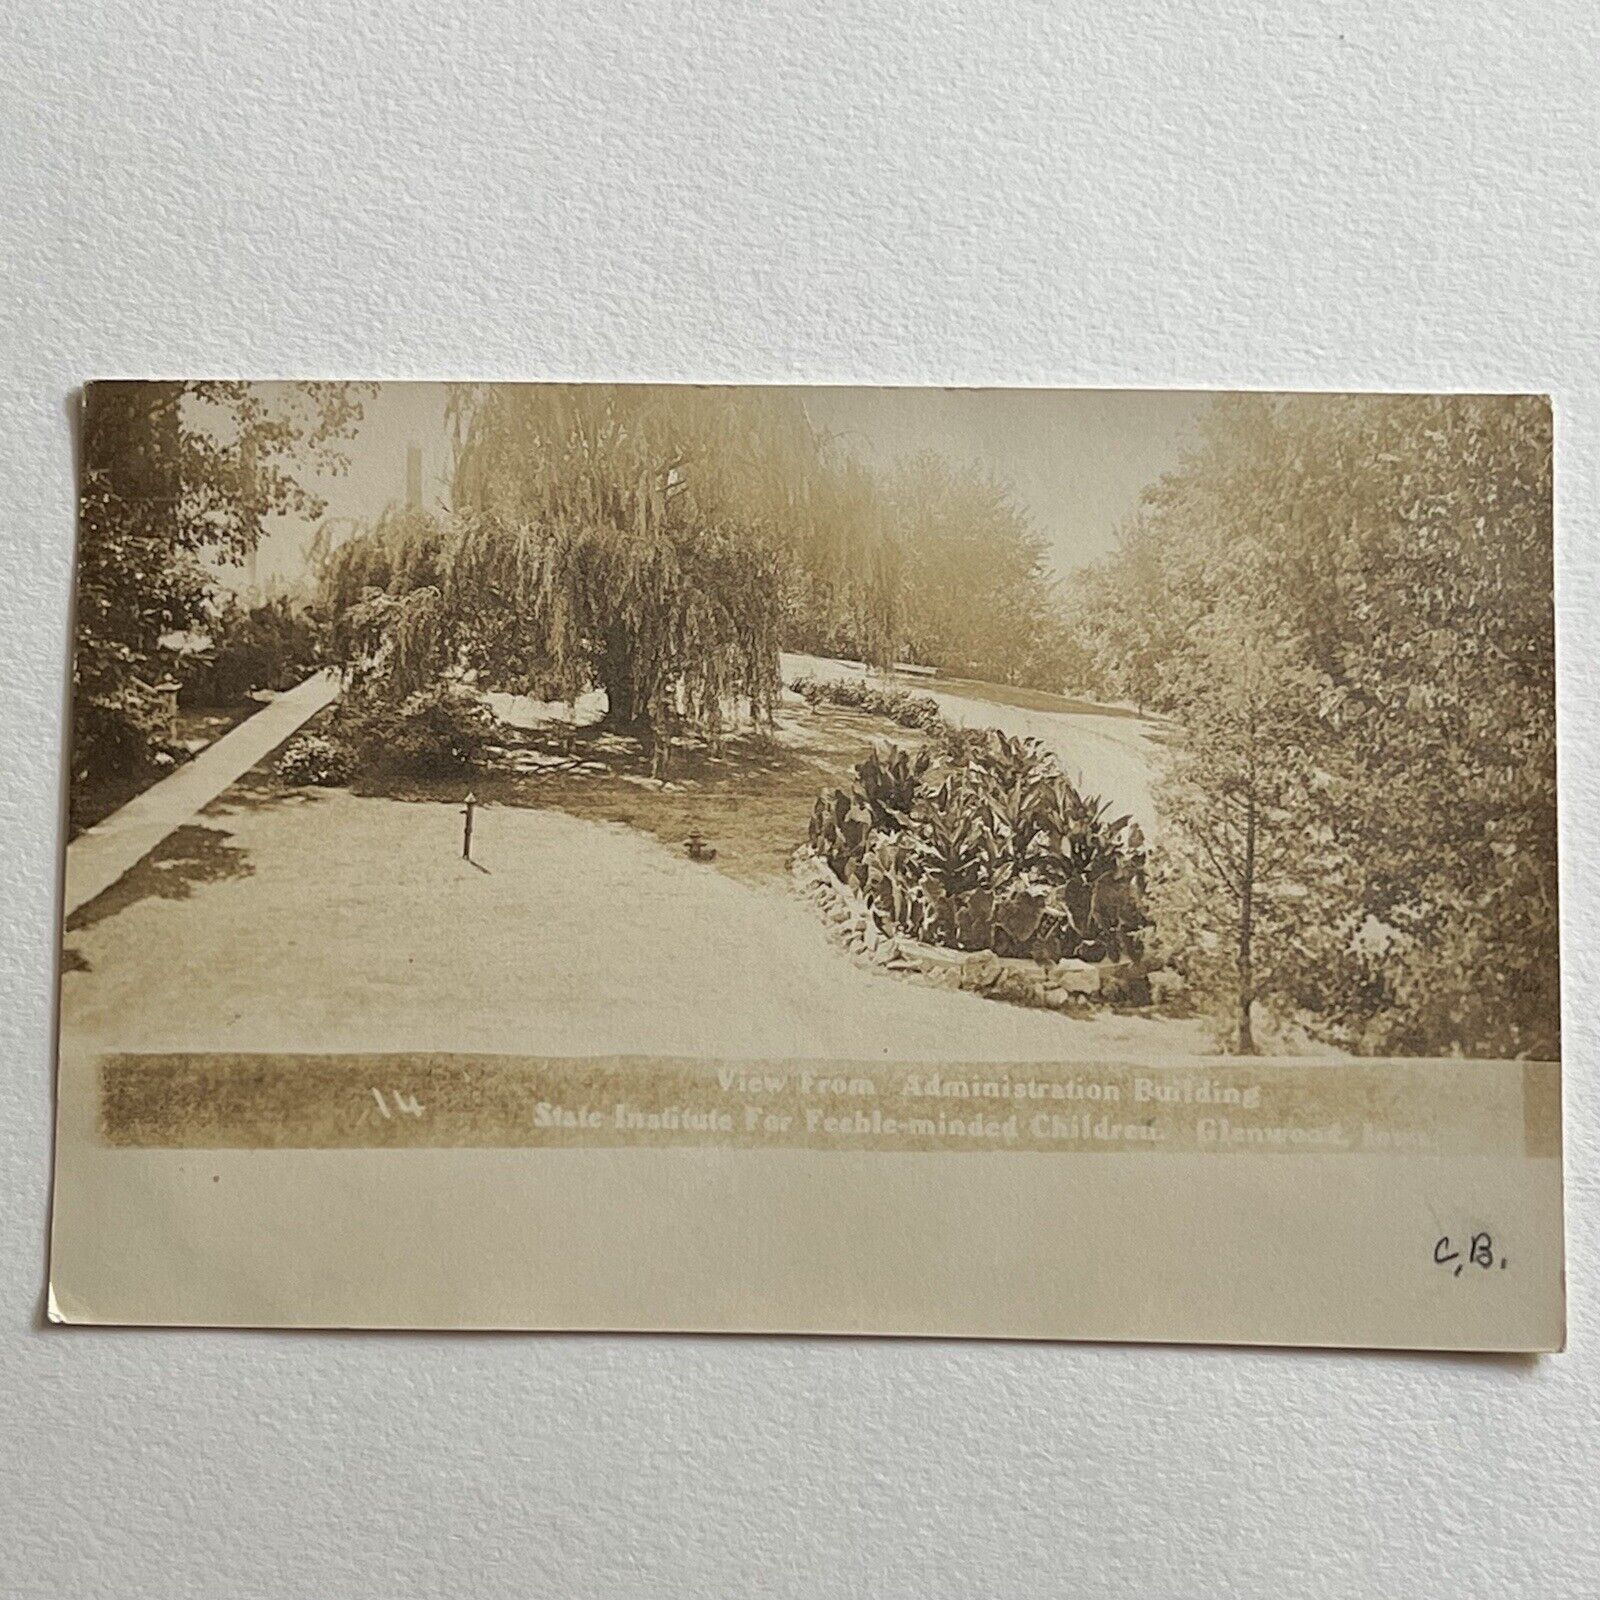 Antique RPPC Real Postcard Photograph Inst Feeble Minded Children Glenwood IA